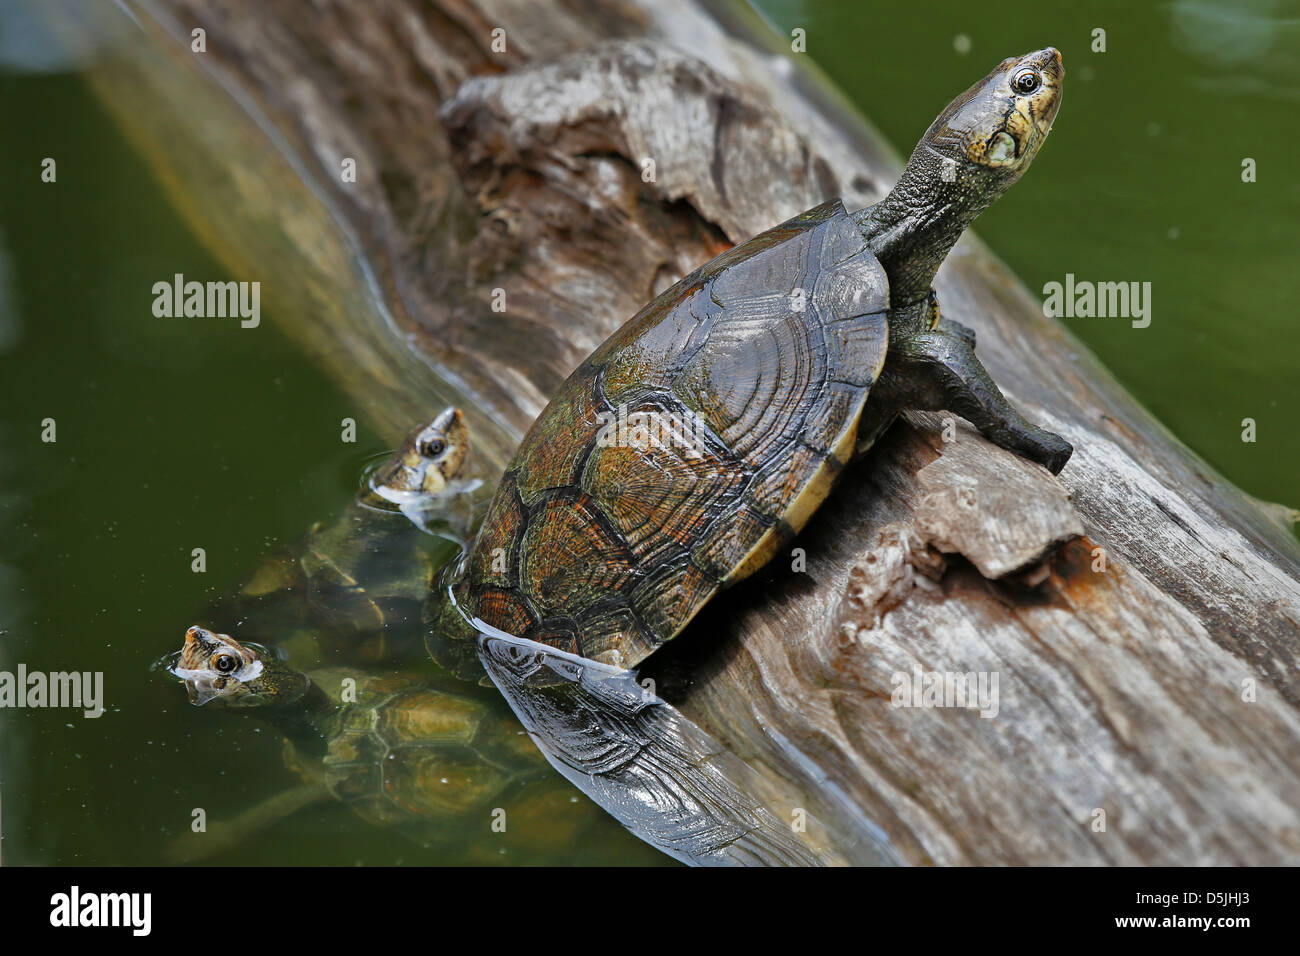 Critically ENDANGERED Madagascan Big-headed Turtle (Erymnochelys madagascariensis) floating and basking on a log in the wild. Stock Photo